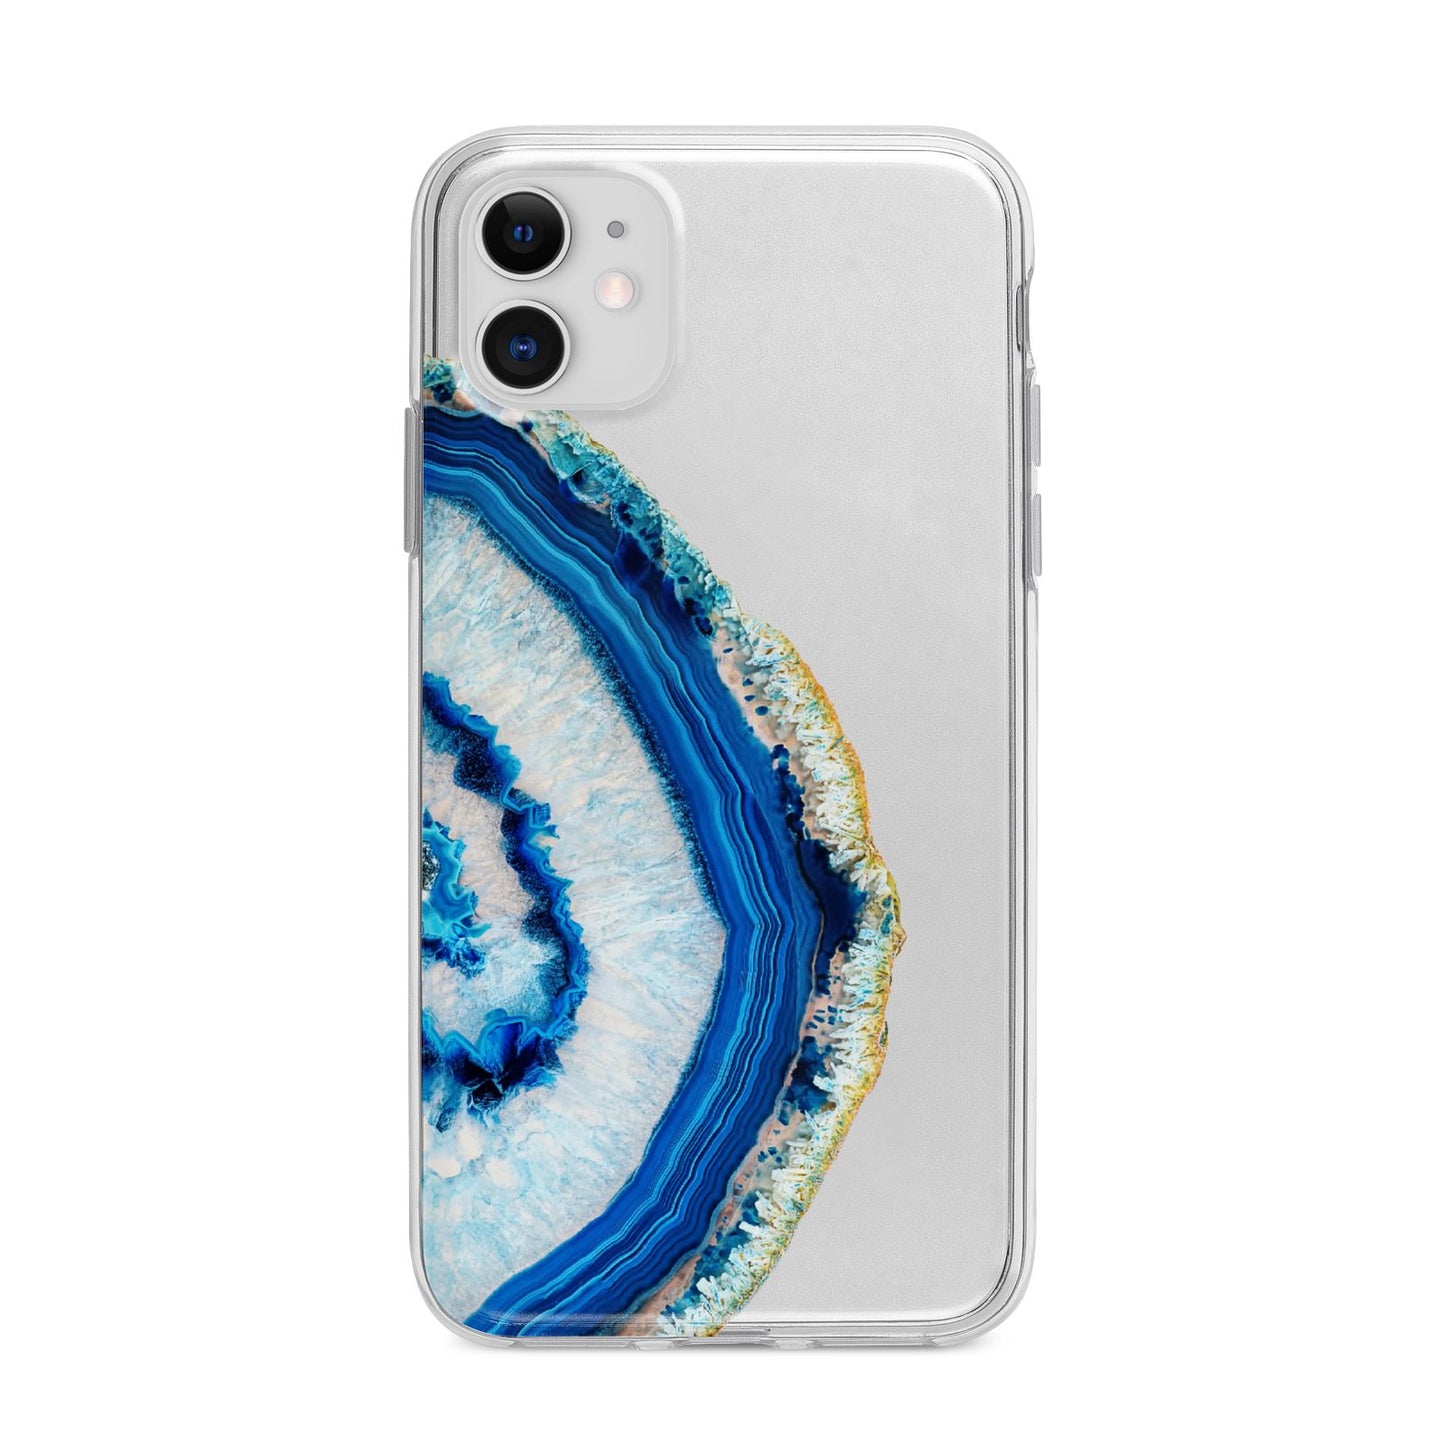 Agate Dark Blue and Turquoise Apple iPhone 11 in White with Bumper Case